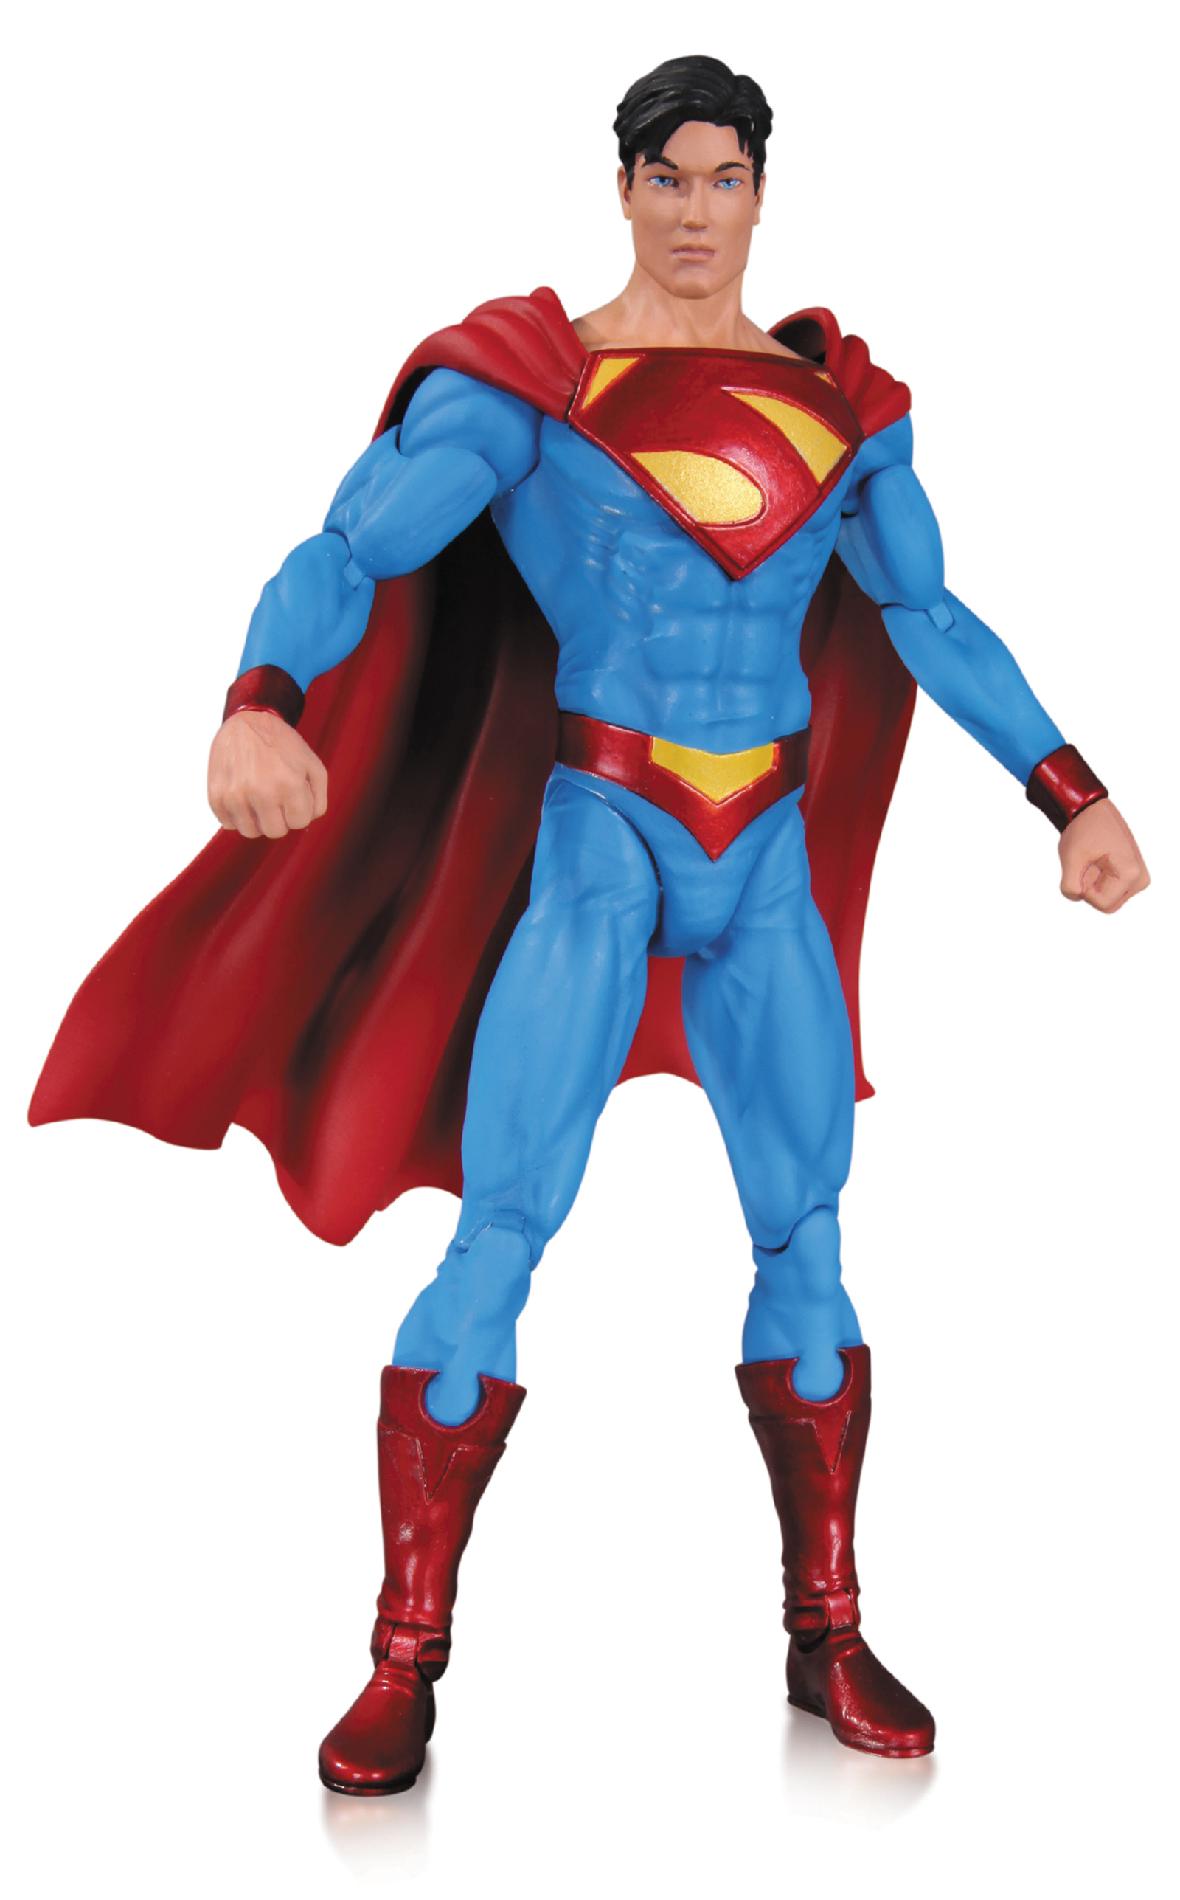 New 52 Earth 2 Superman Action Figure